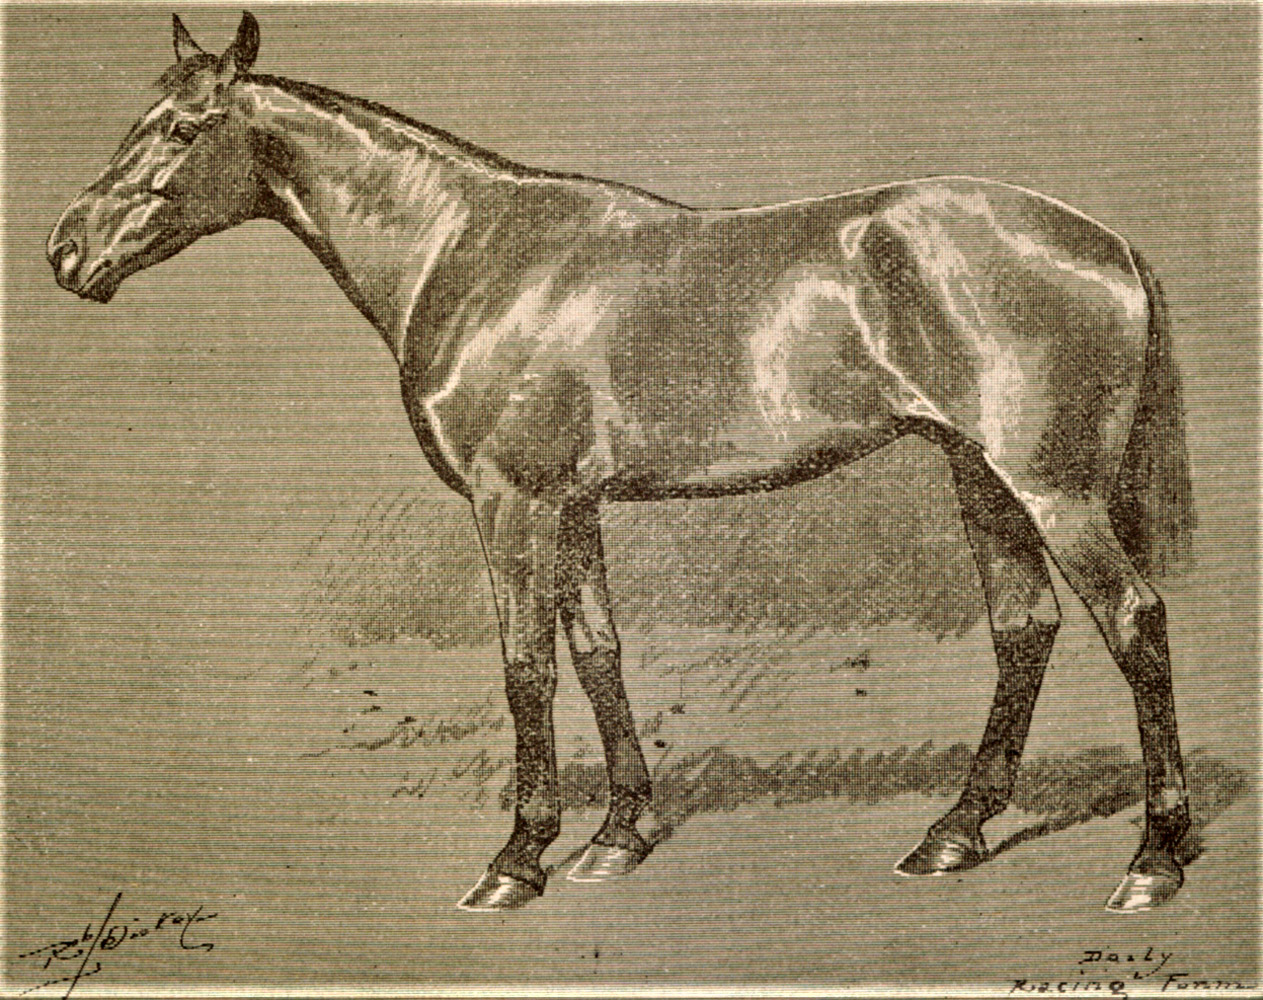 Illustration of Ben Brush from the Daily Racing Form, May 1896 (Keeneland Library Collection/Museum Collection)